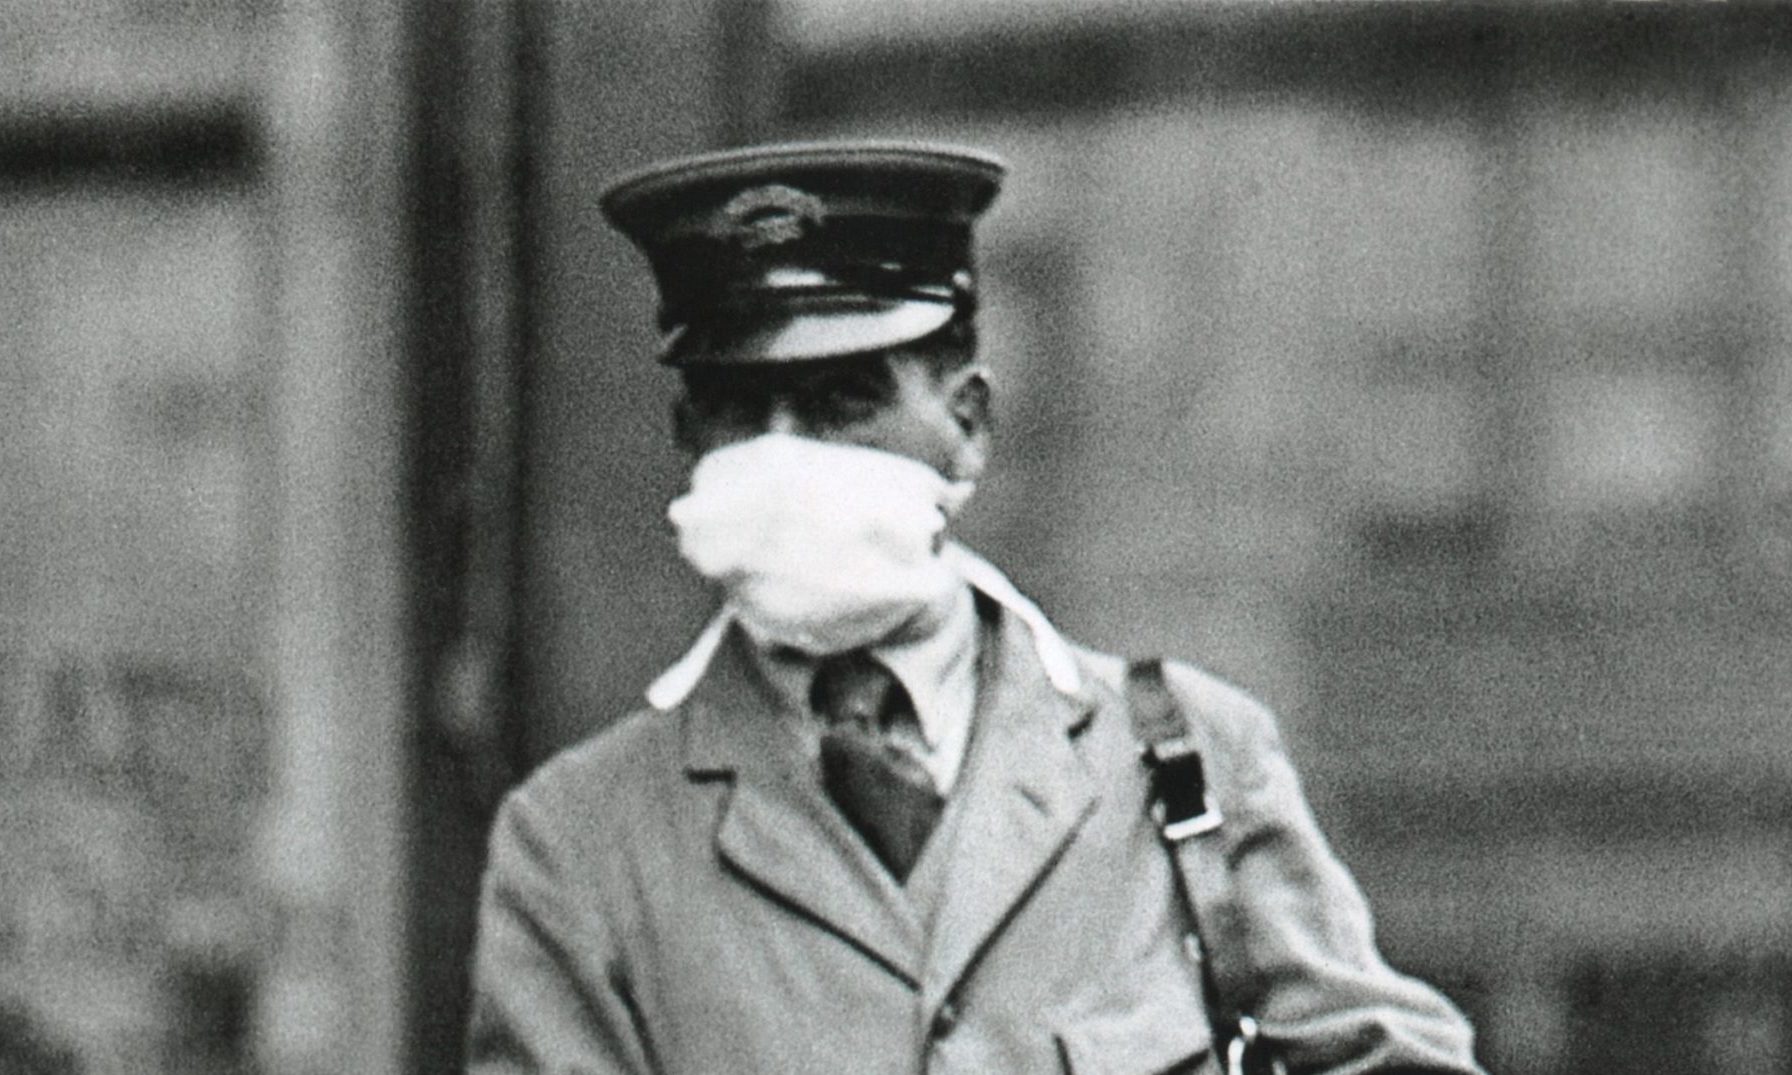 A letter carrier in New York City wearing a gauze mask to avoid catching influenza. in 1918.